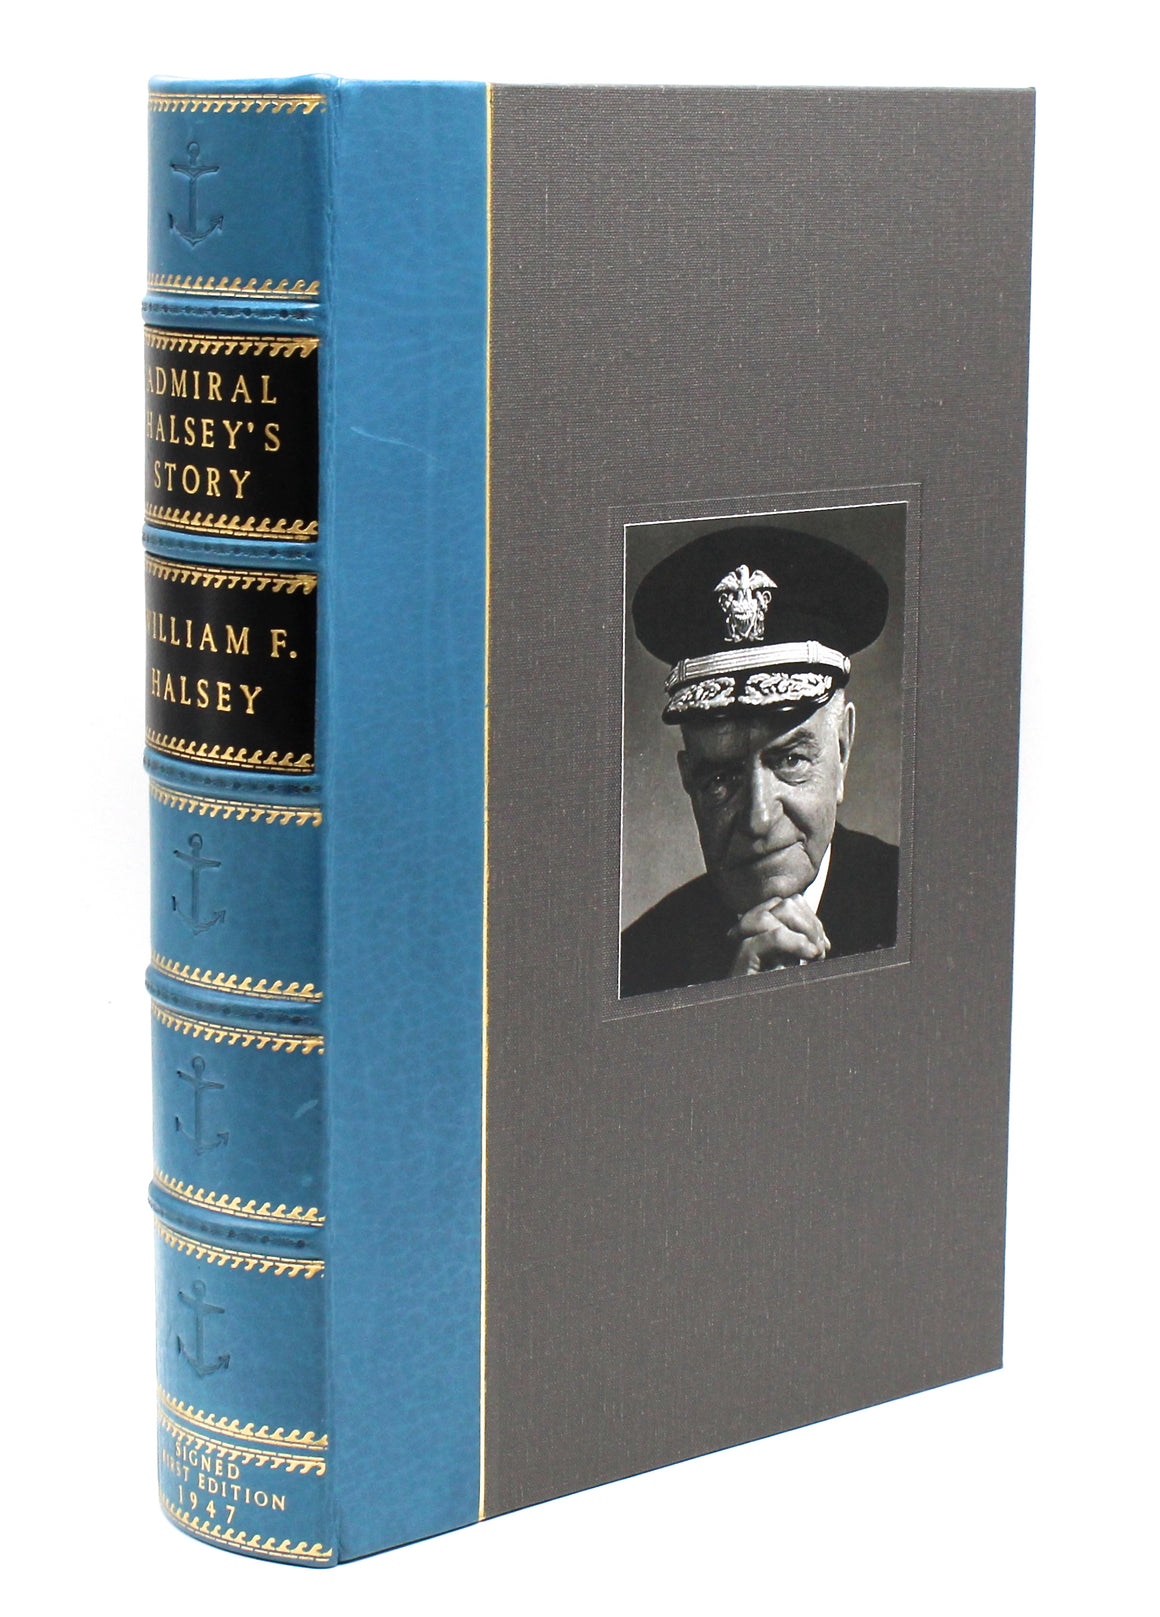 Admiral Halsey's Story by William F. Halsey and J. Bryan, Signed and Inscribed First Edition, 1947